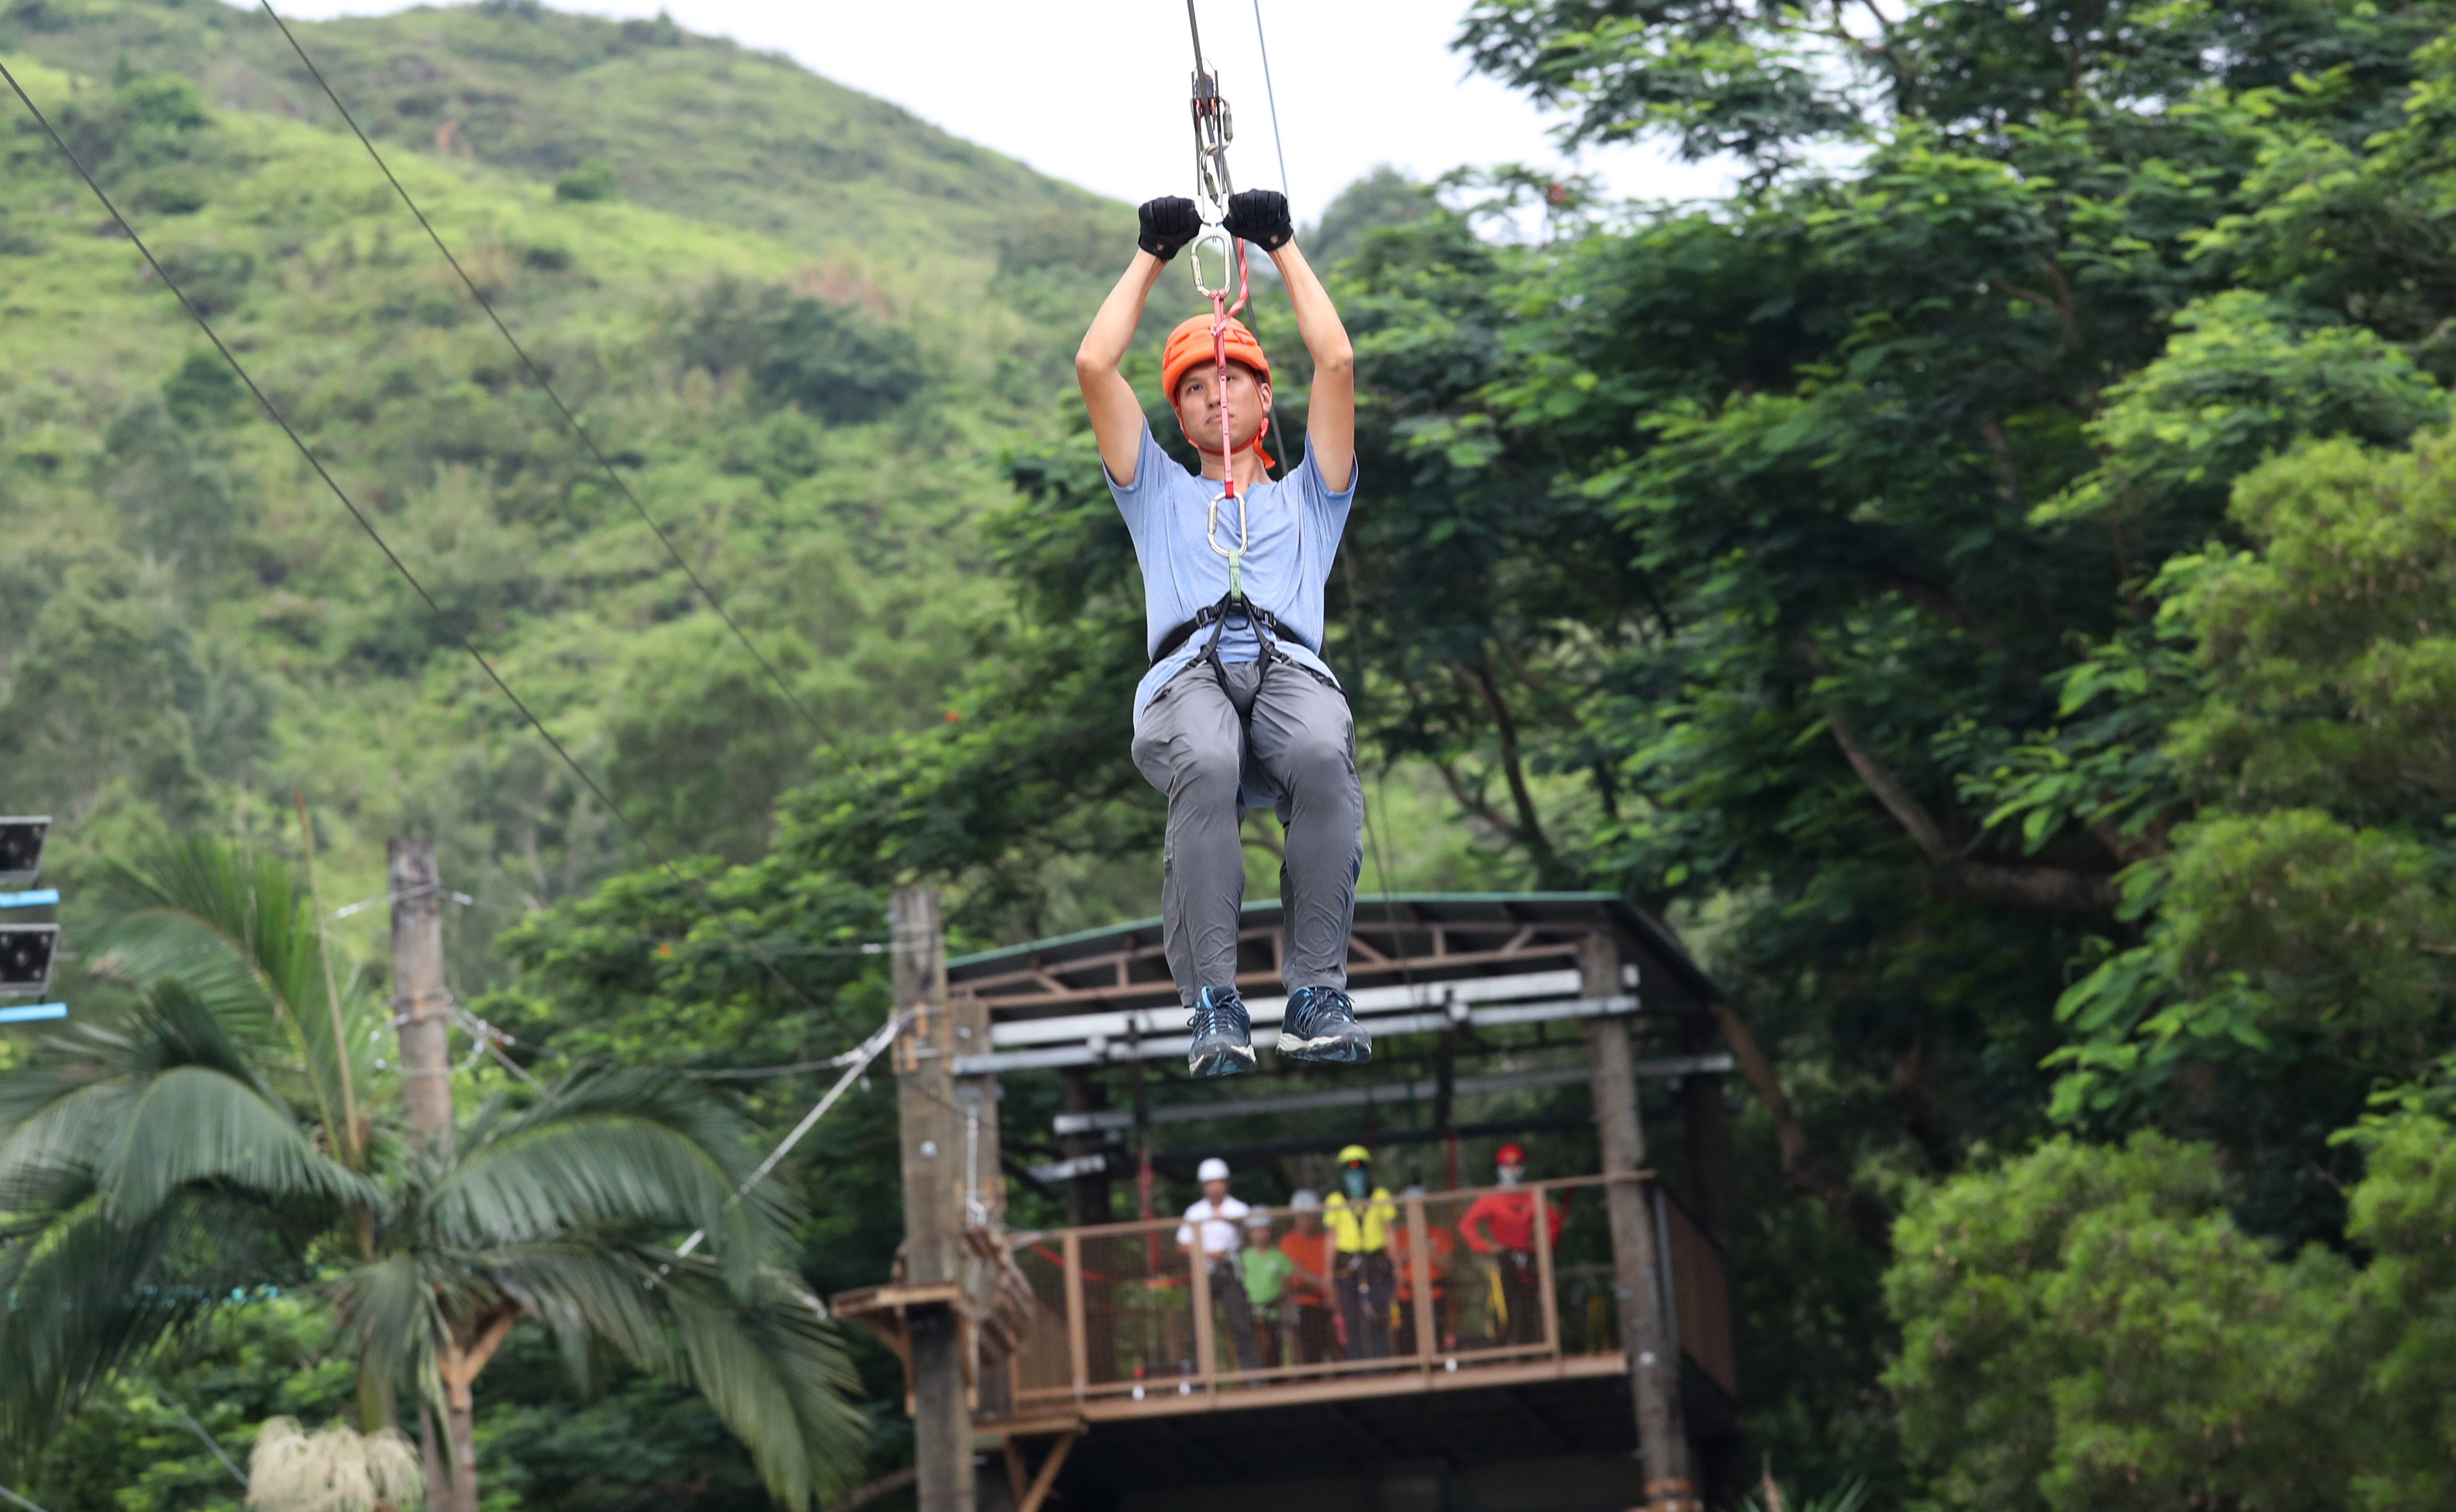 A youngster takes to the zipline at the training camp in Pat Heung. Photo: Nora Tam